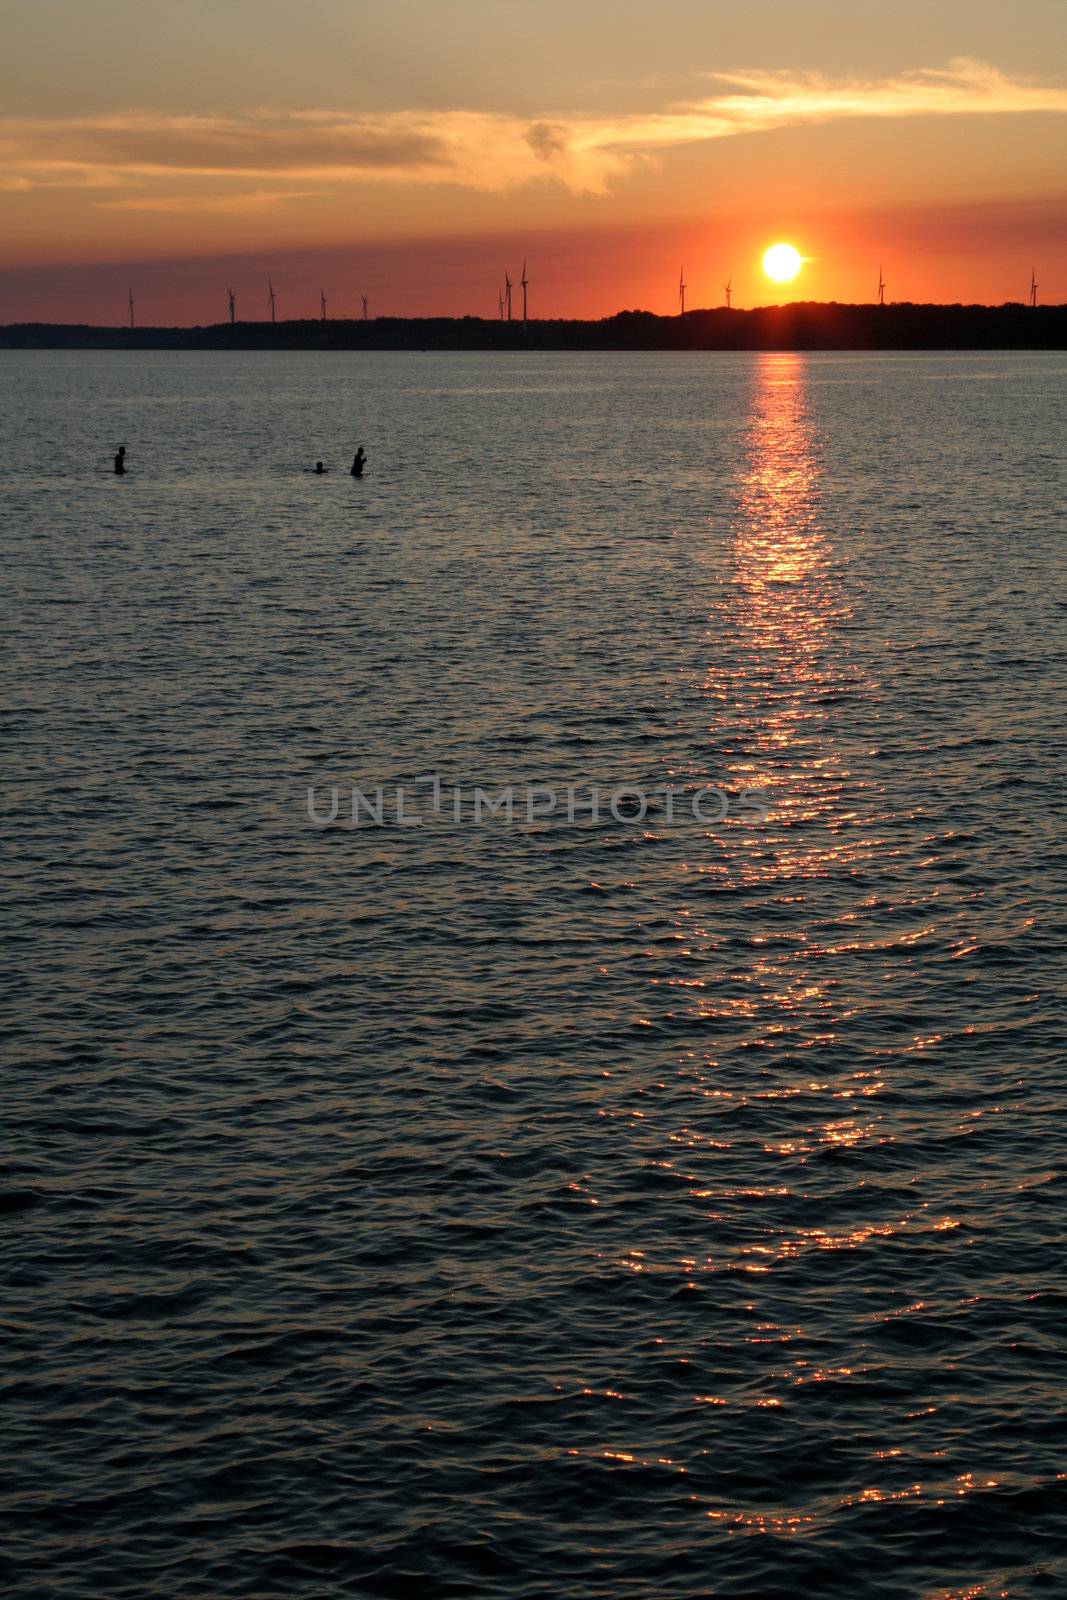 Three people swimming at dusk, with the setting sun and wind turbines in the background.
